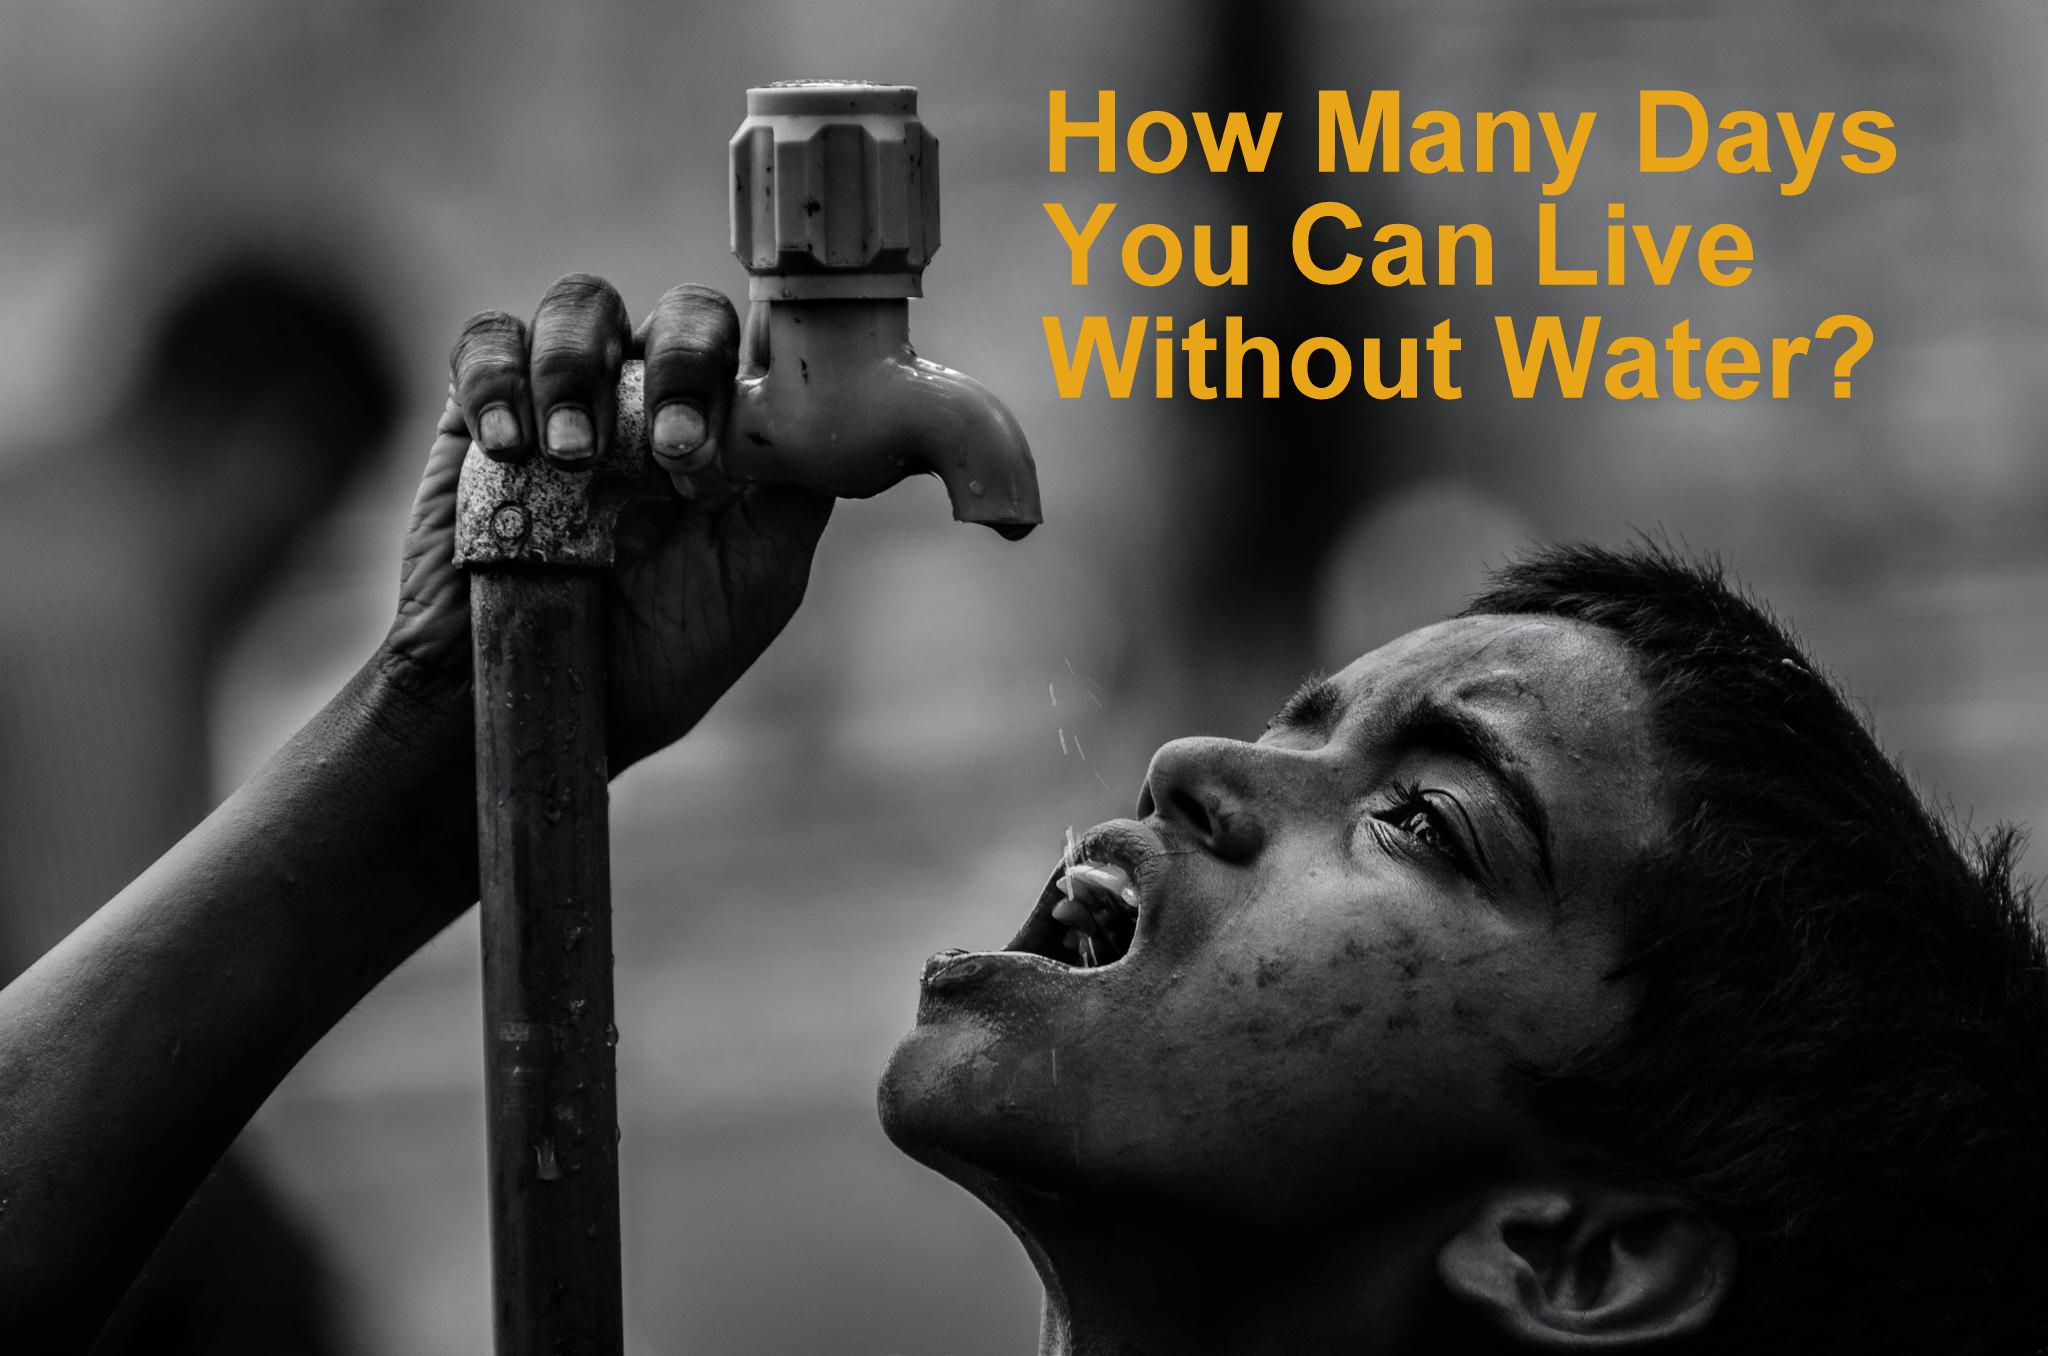 How many days you can live without water